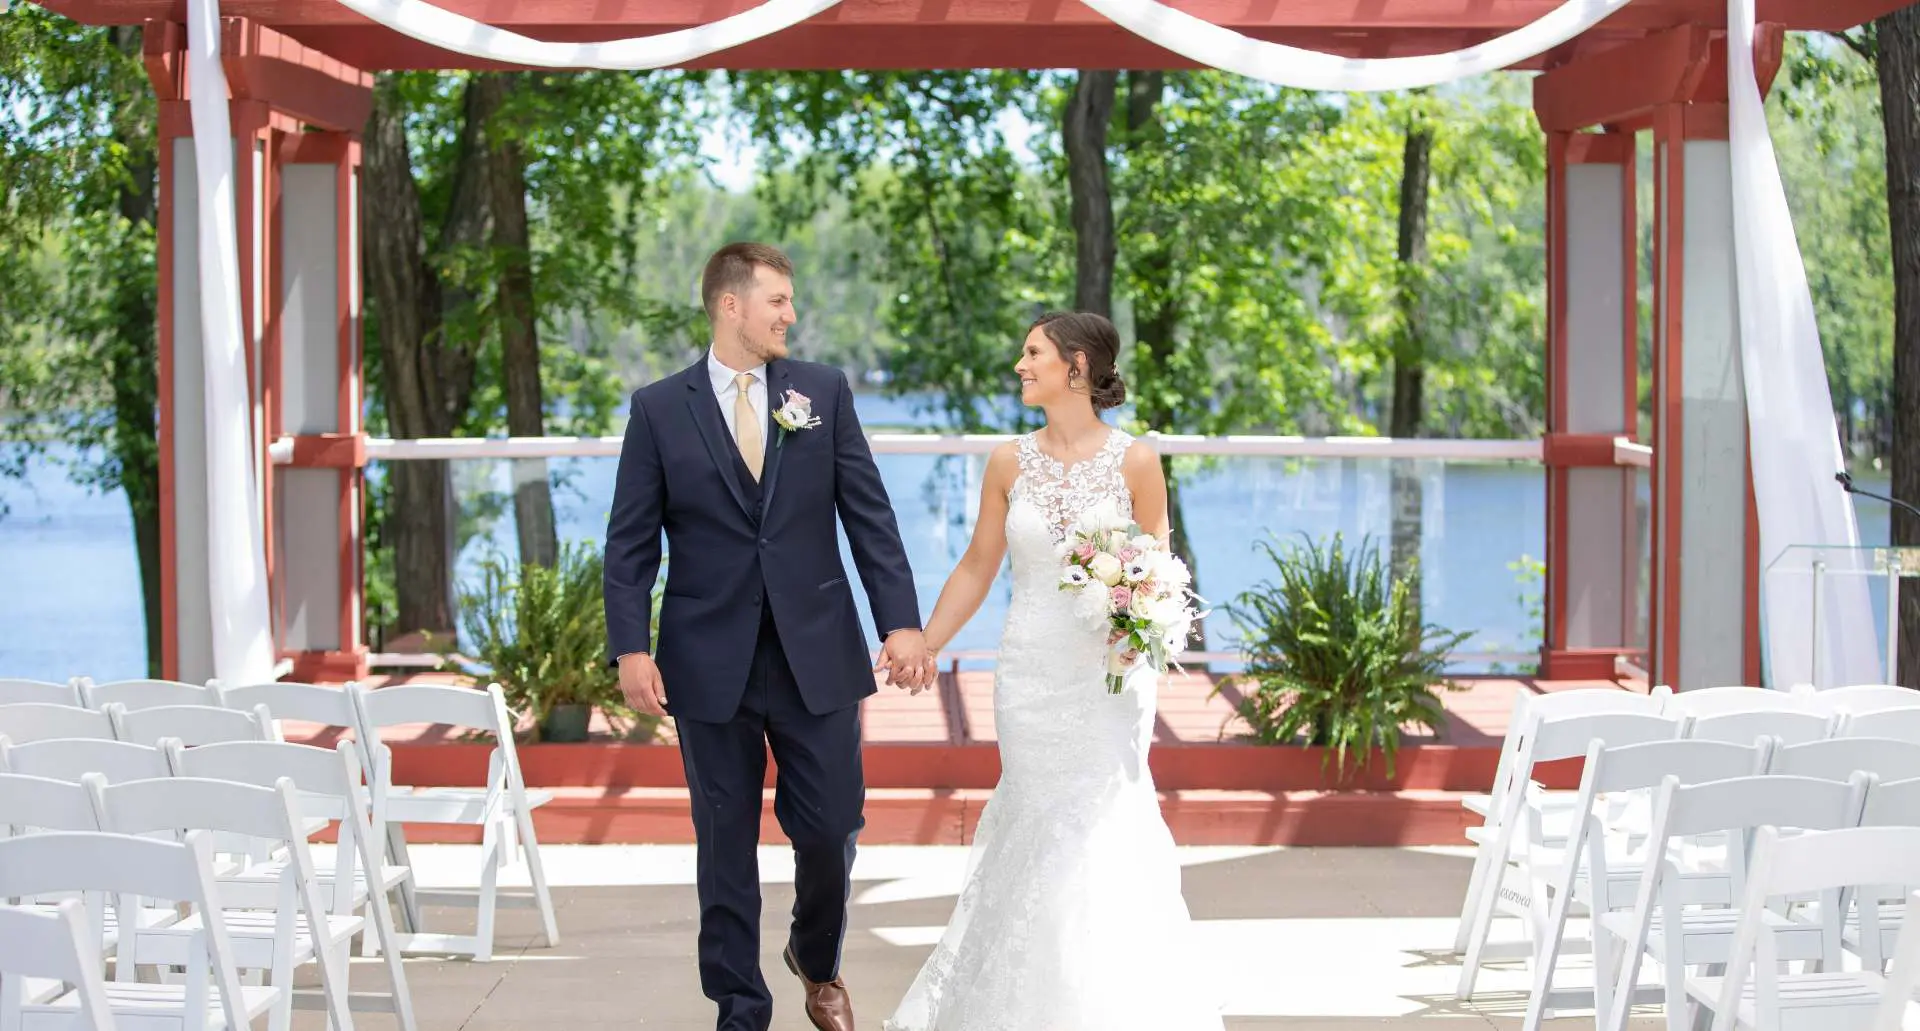 Wedding Pricing Guide at Celebrations on the River La Crosse, WI Wedding Venue